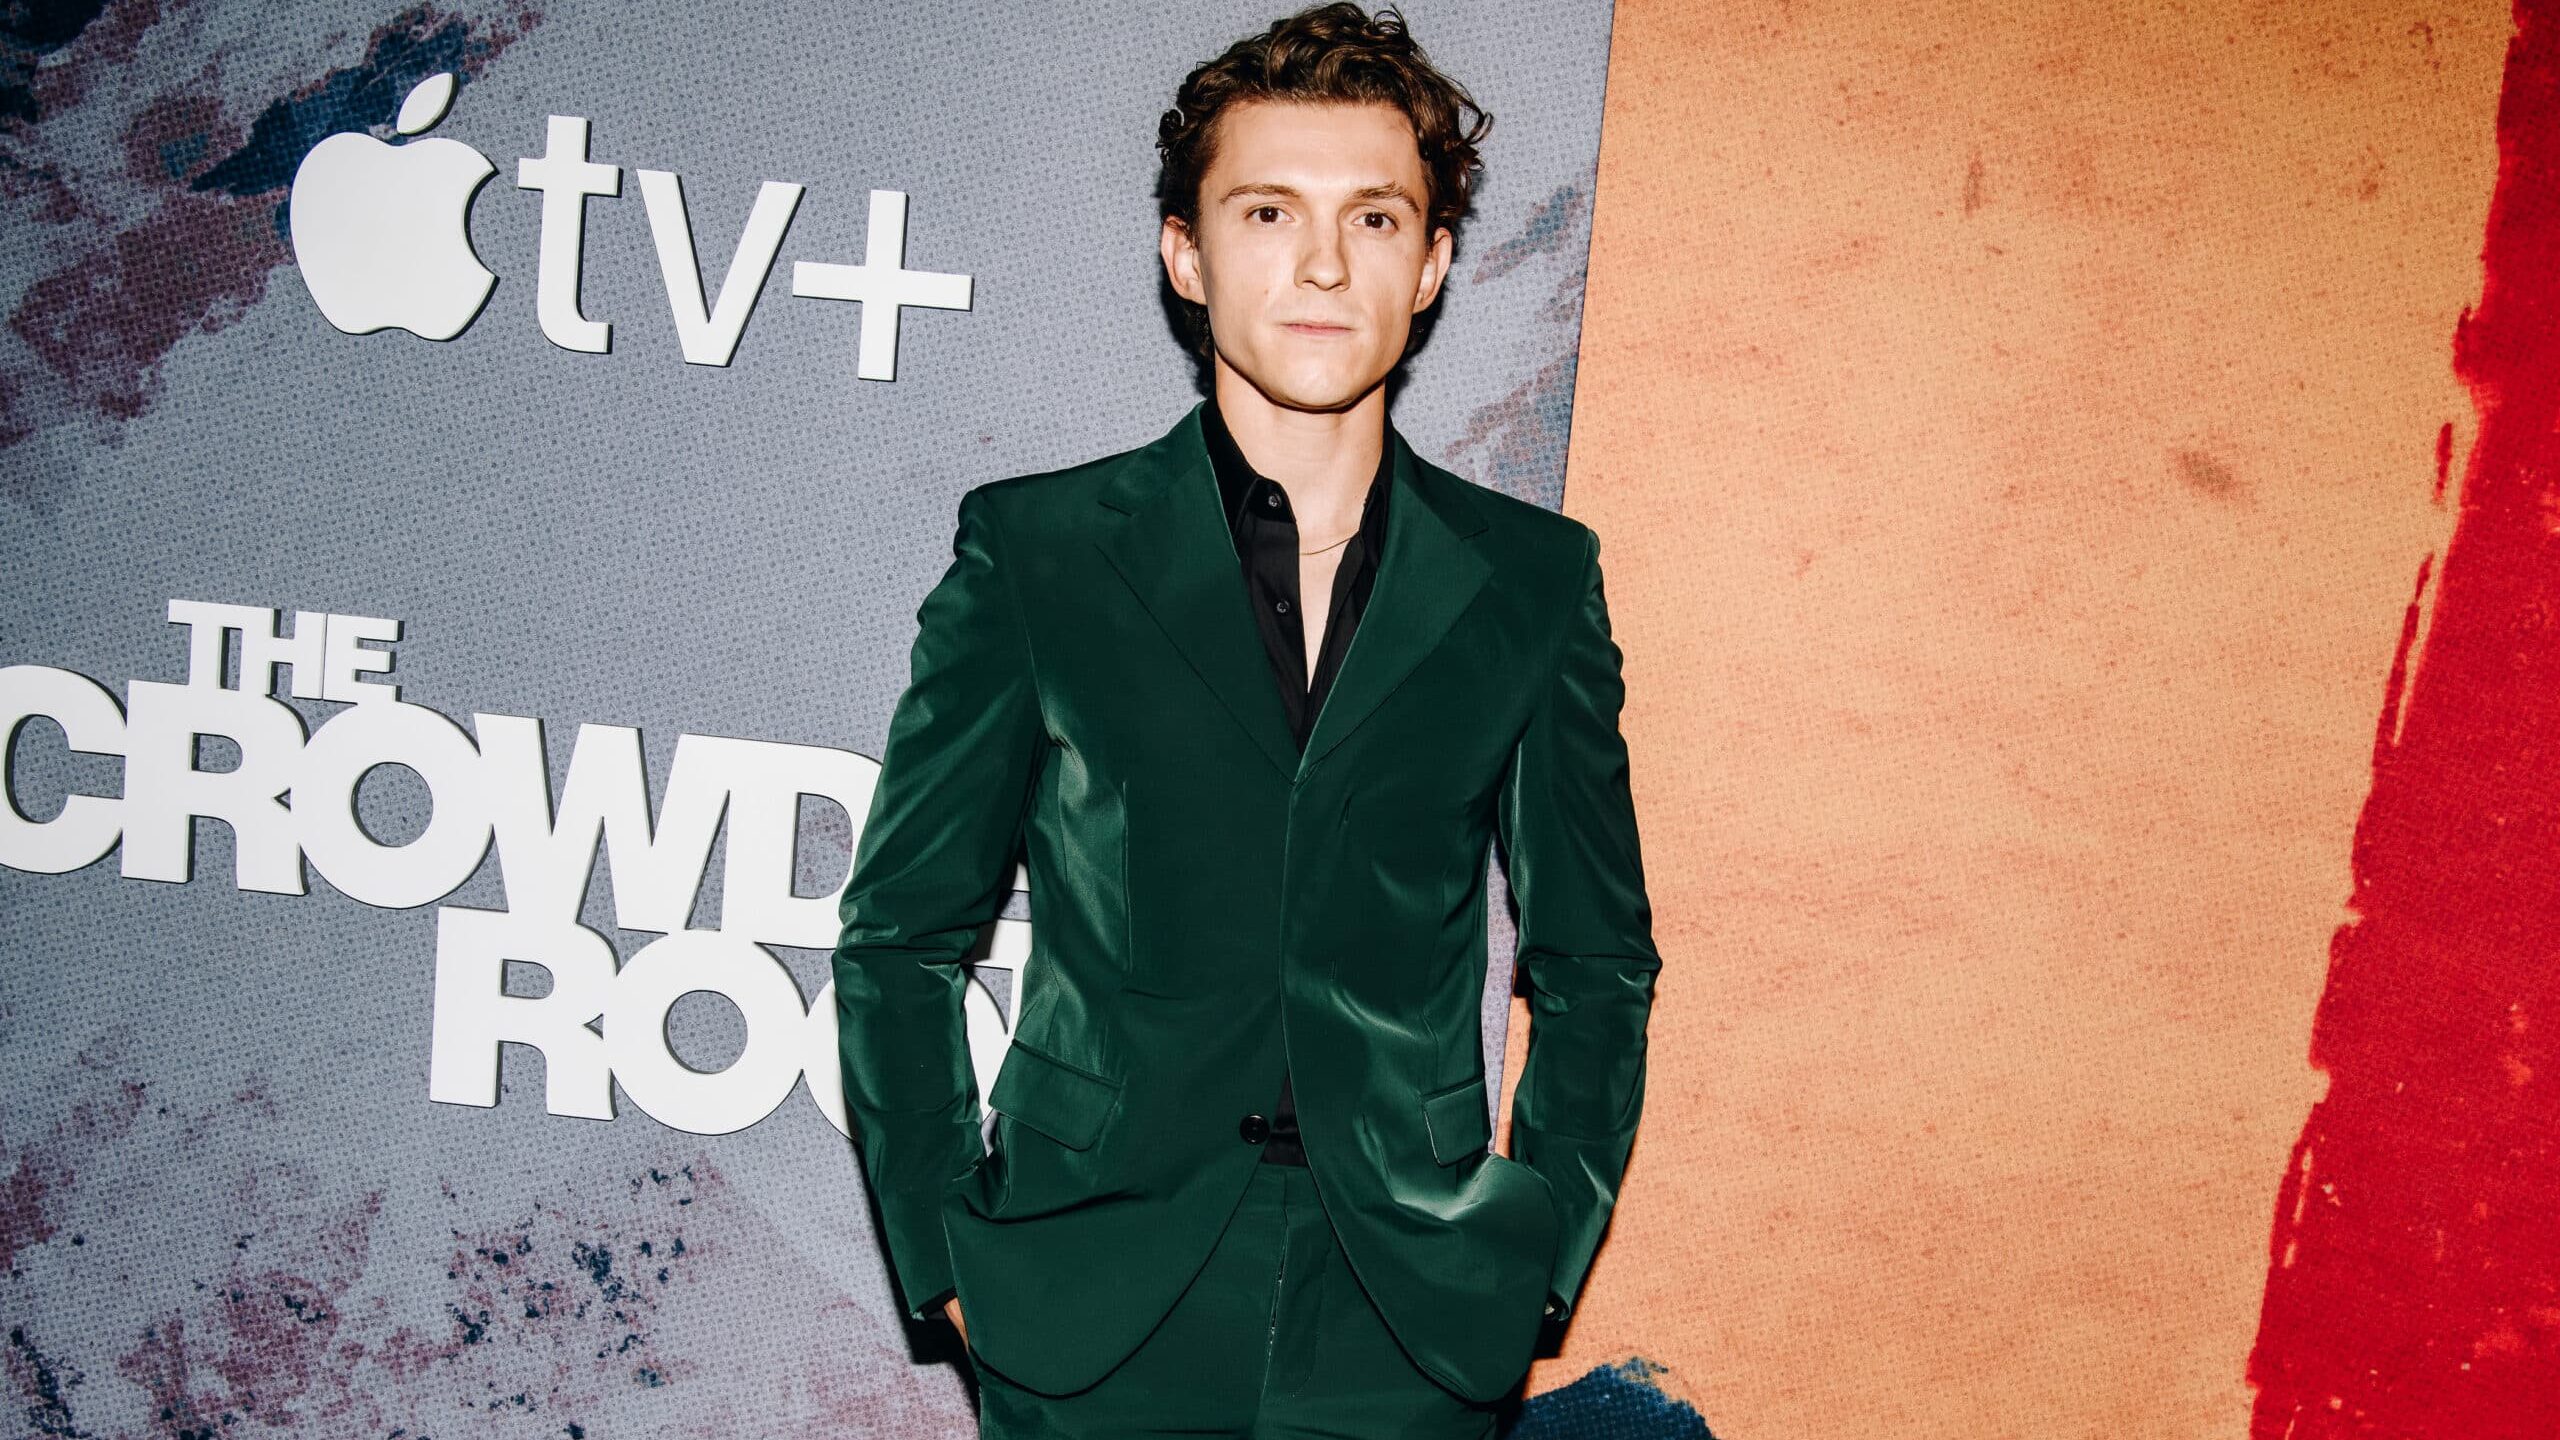 Tom Holland Met With Widespread Praise For His Role In “The Crowded ...